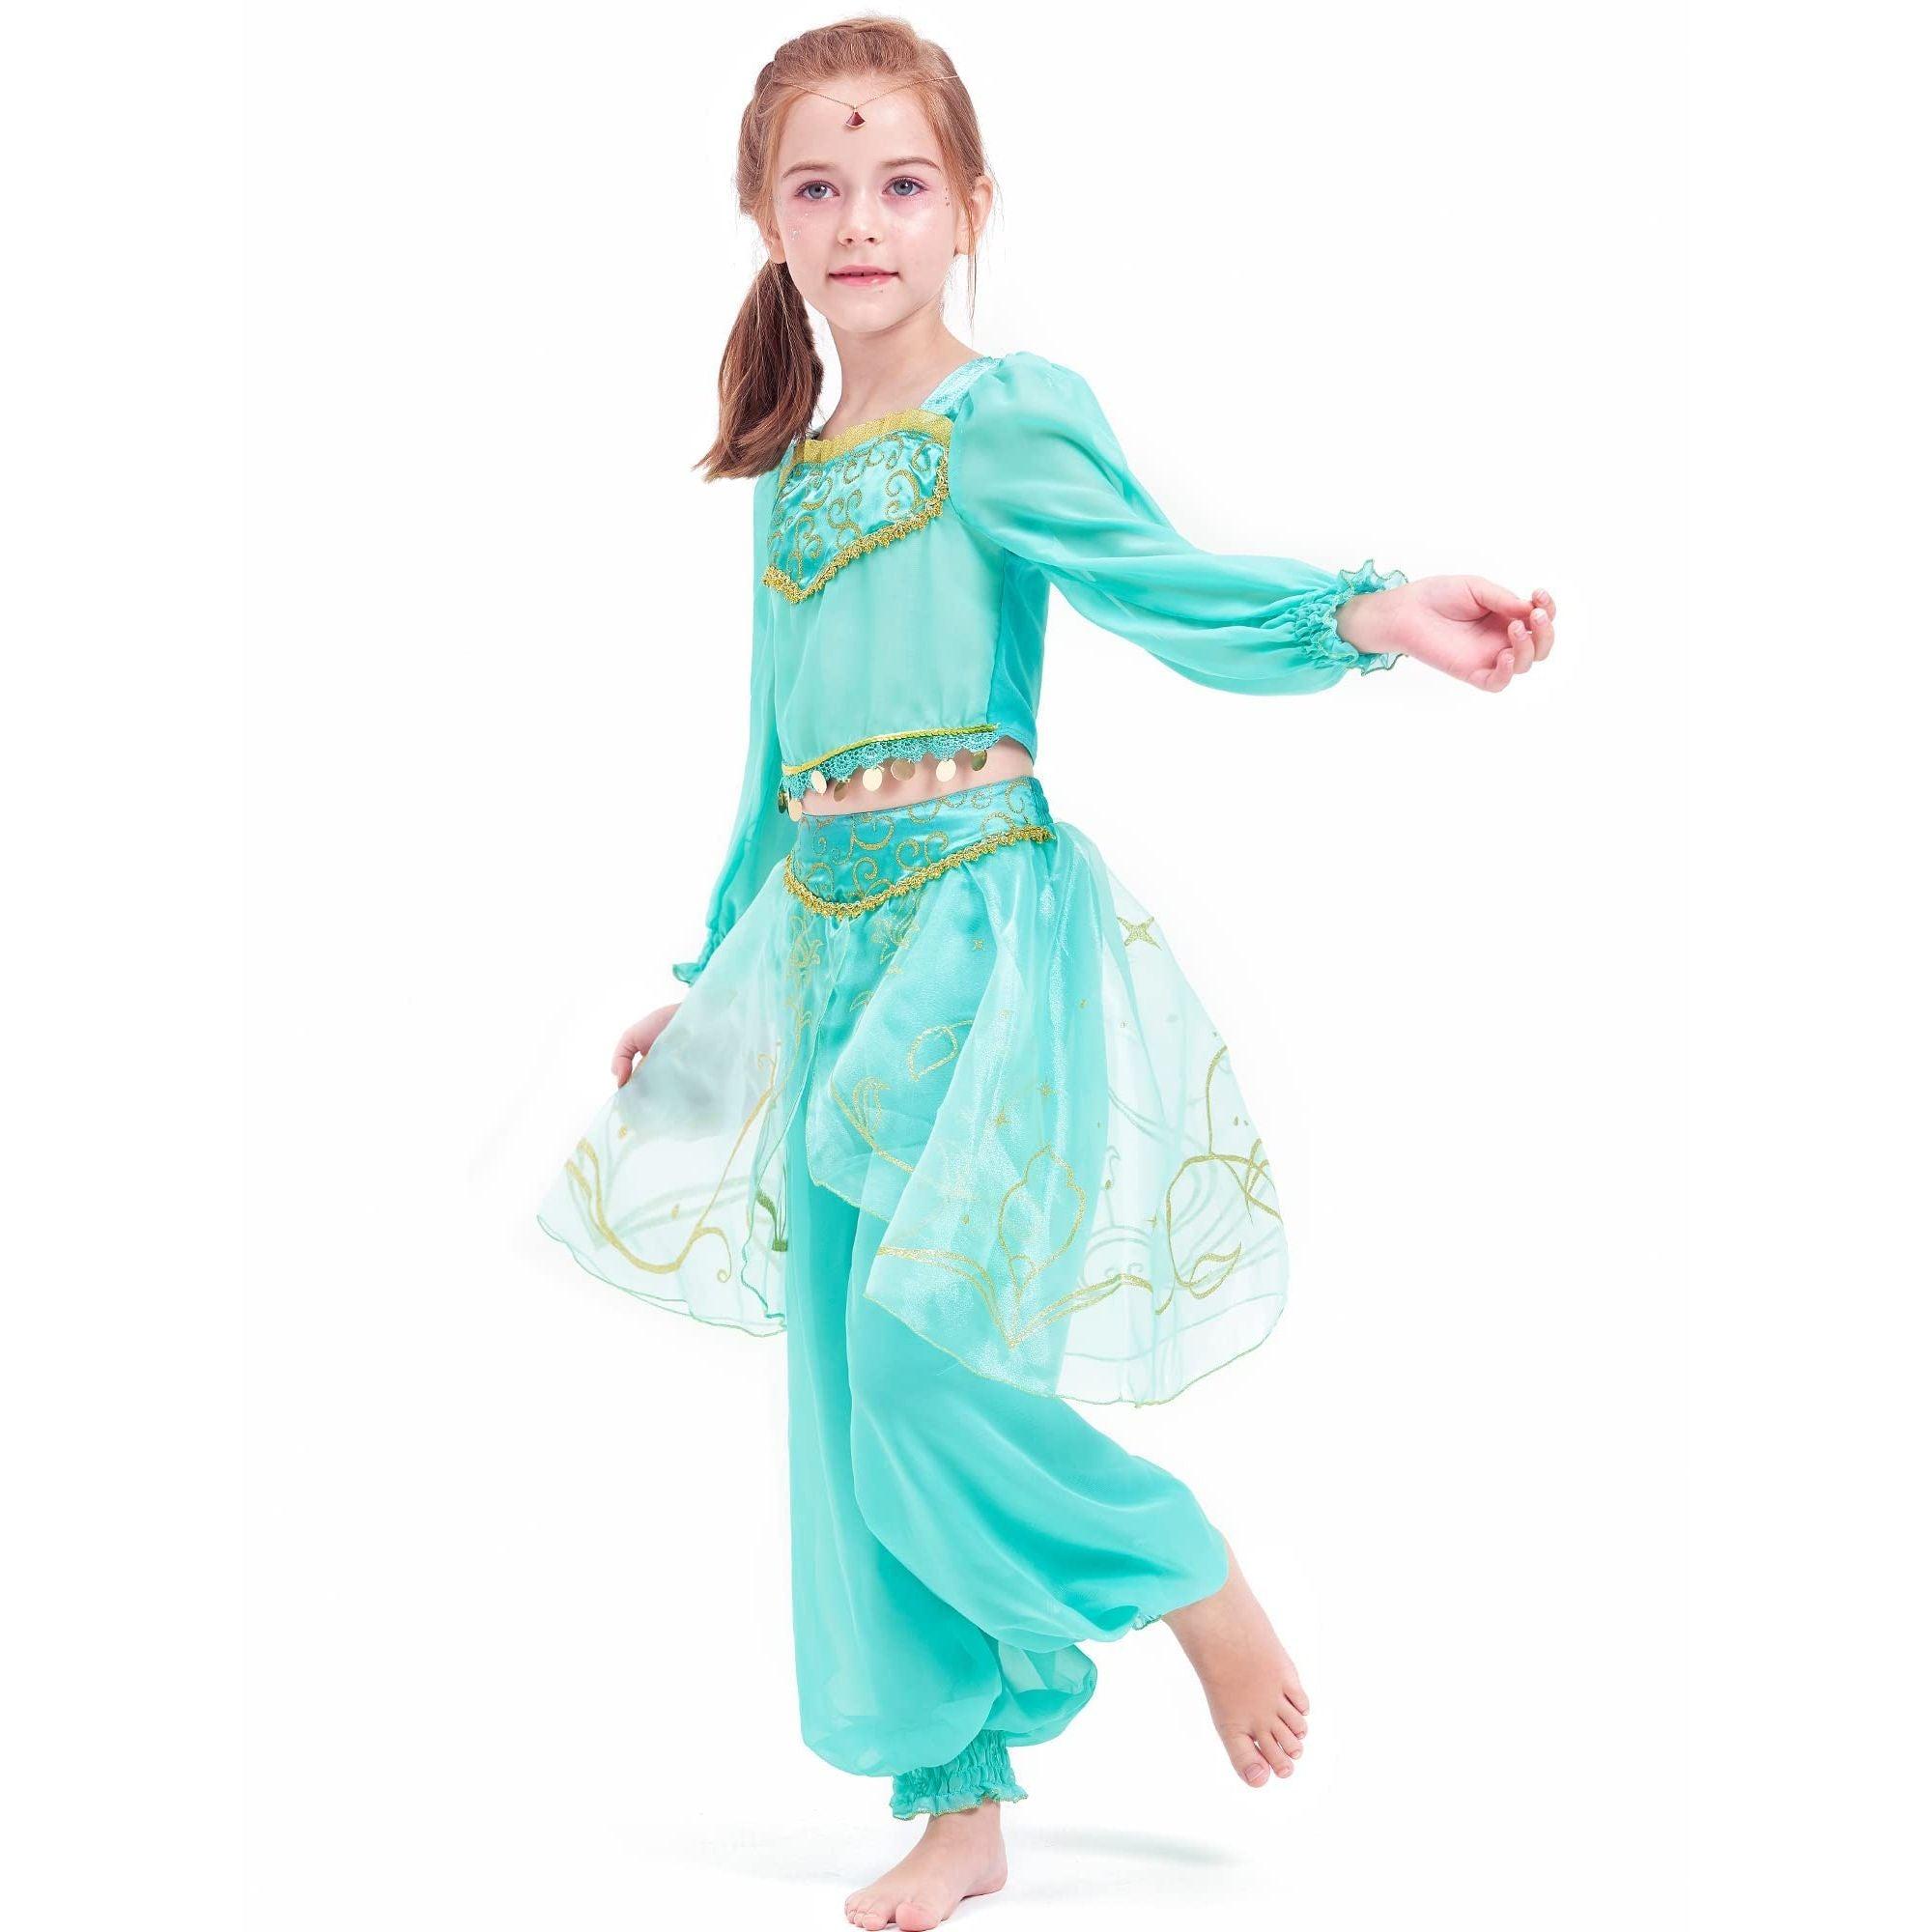 IKALI Girls Jasmine Costume Classic Princess Dress Toddler Gift Fancy Dress Up for Halloween Birthday Party 3-4Y 4